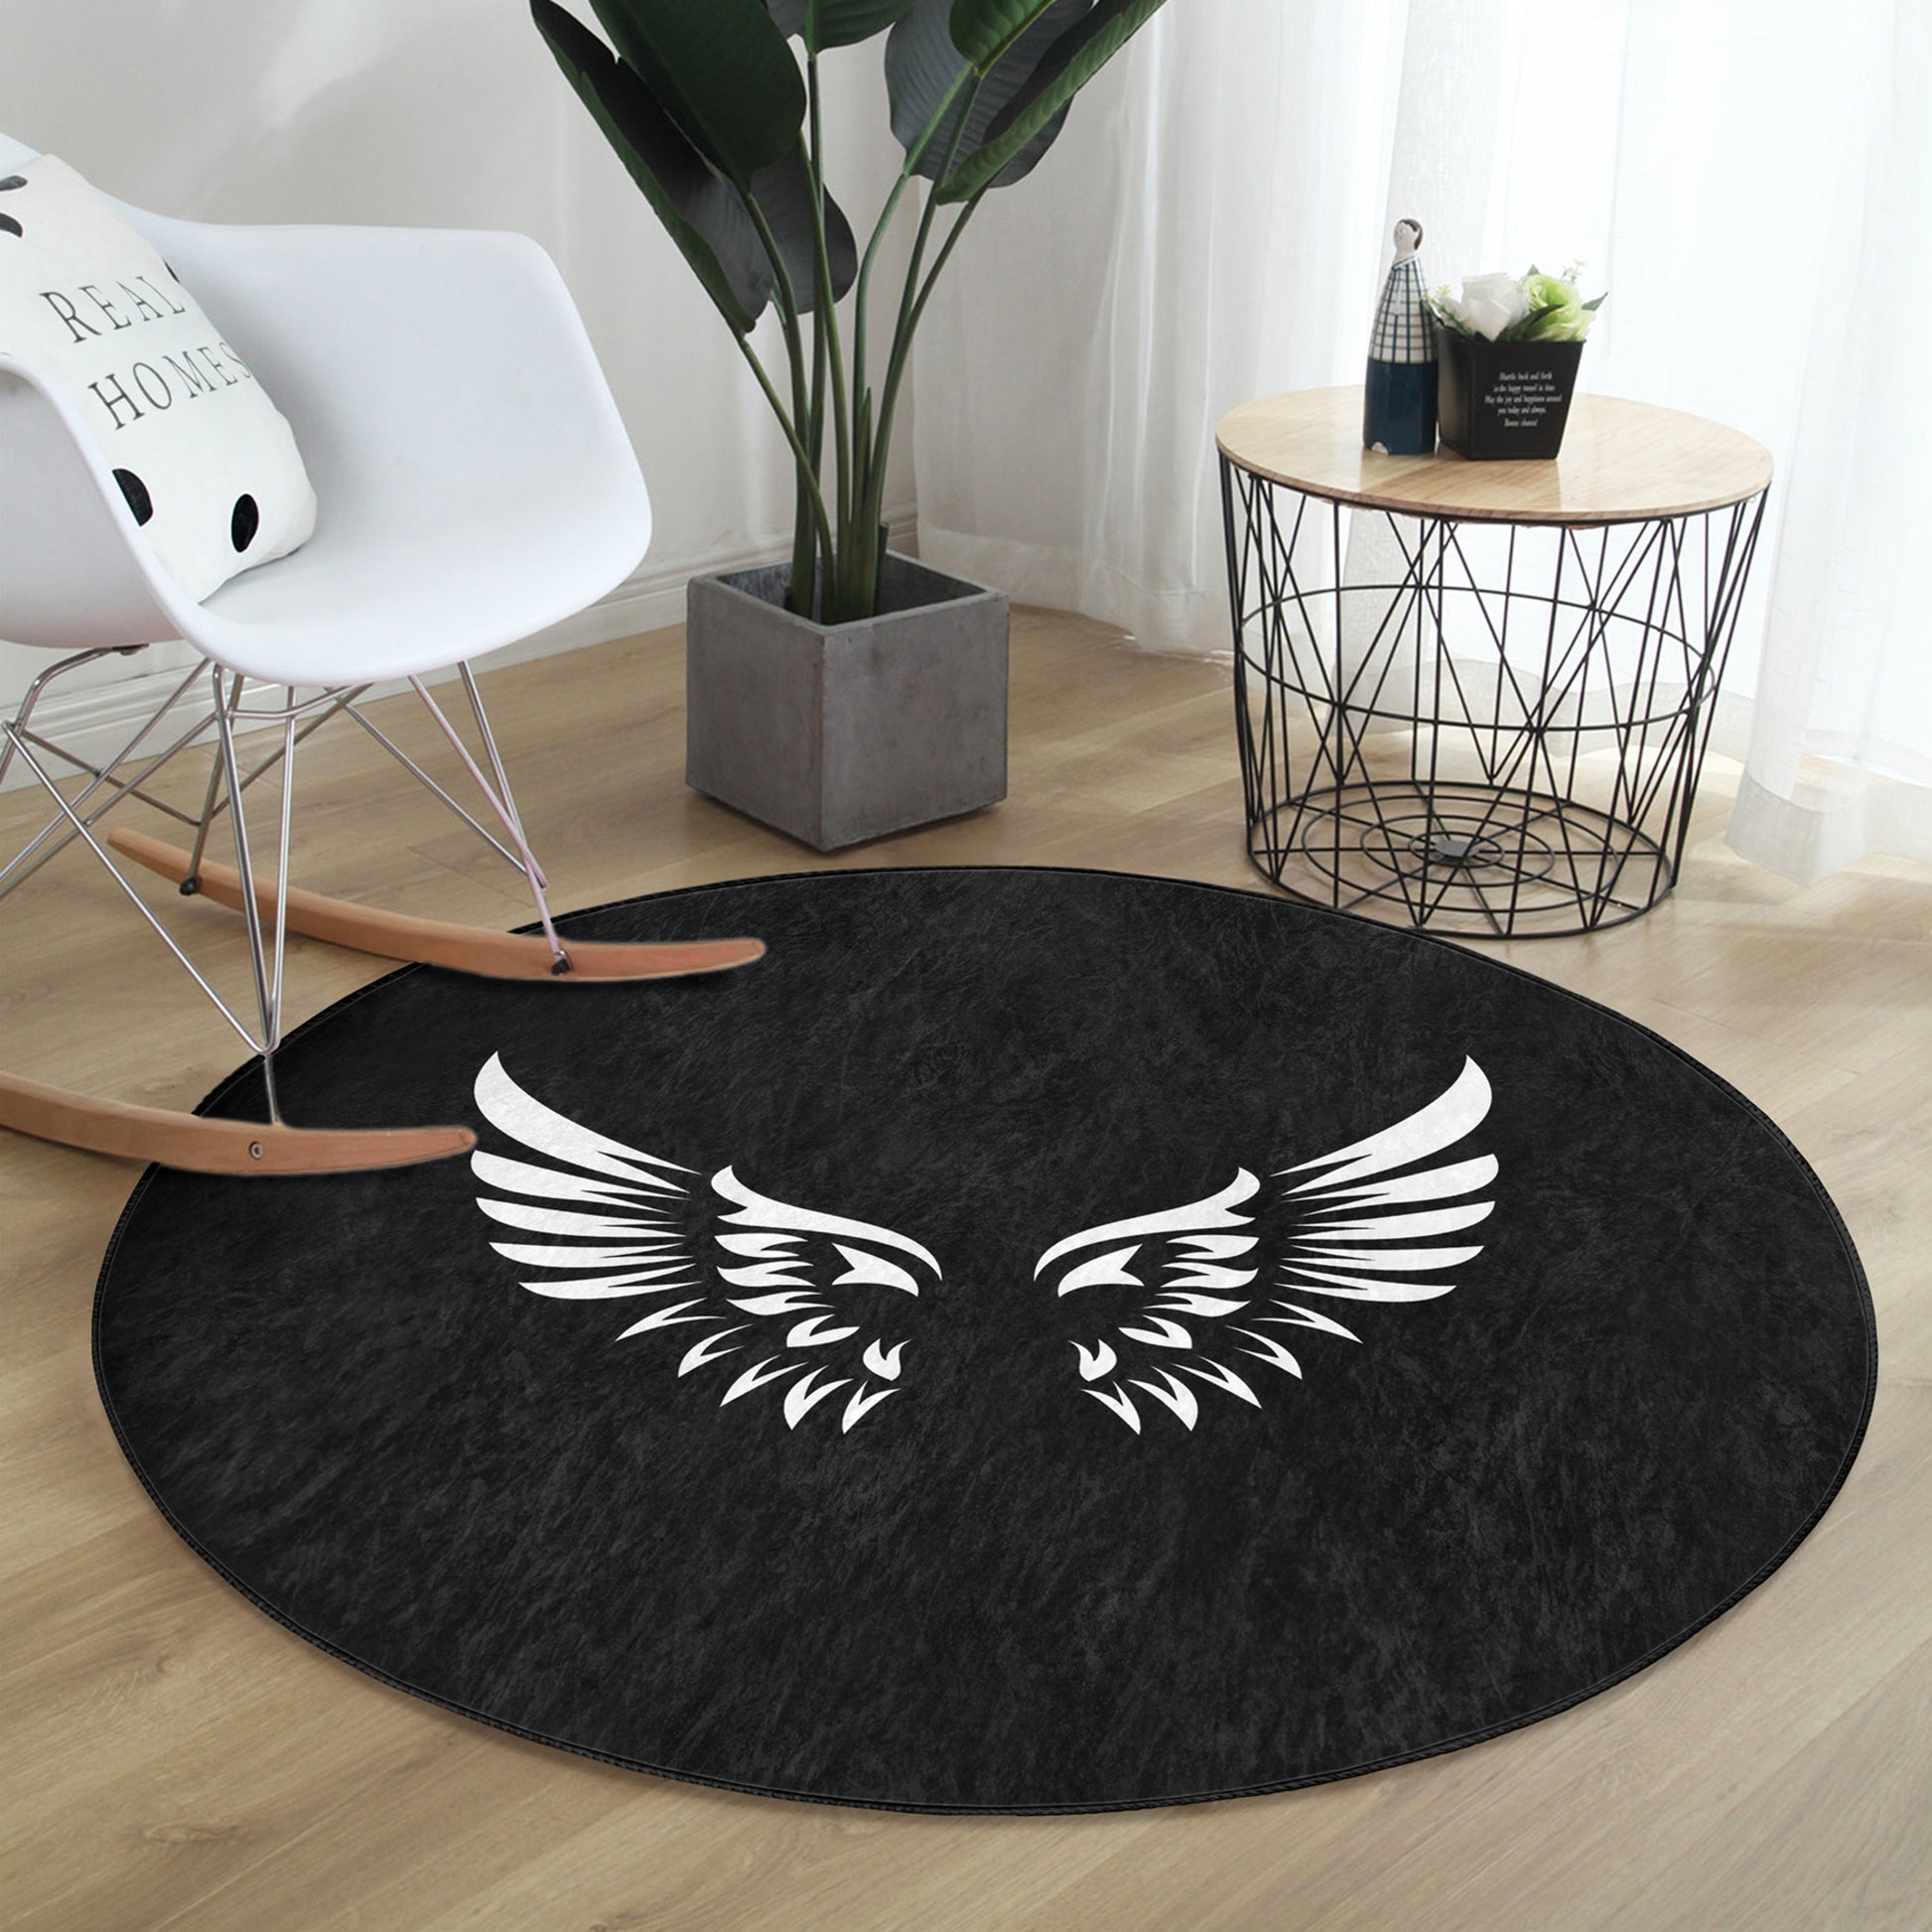 Washable Rug with Angelic Design - Easy Maintenance